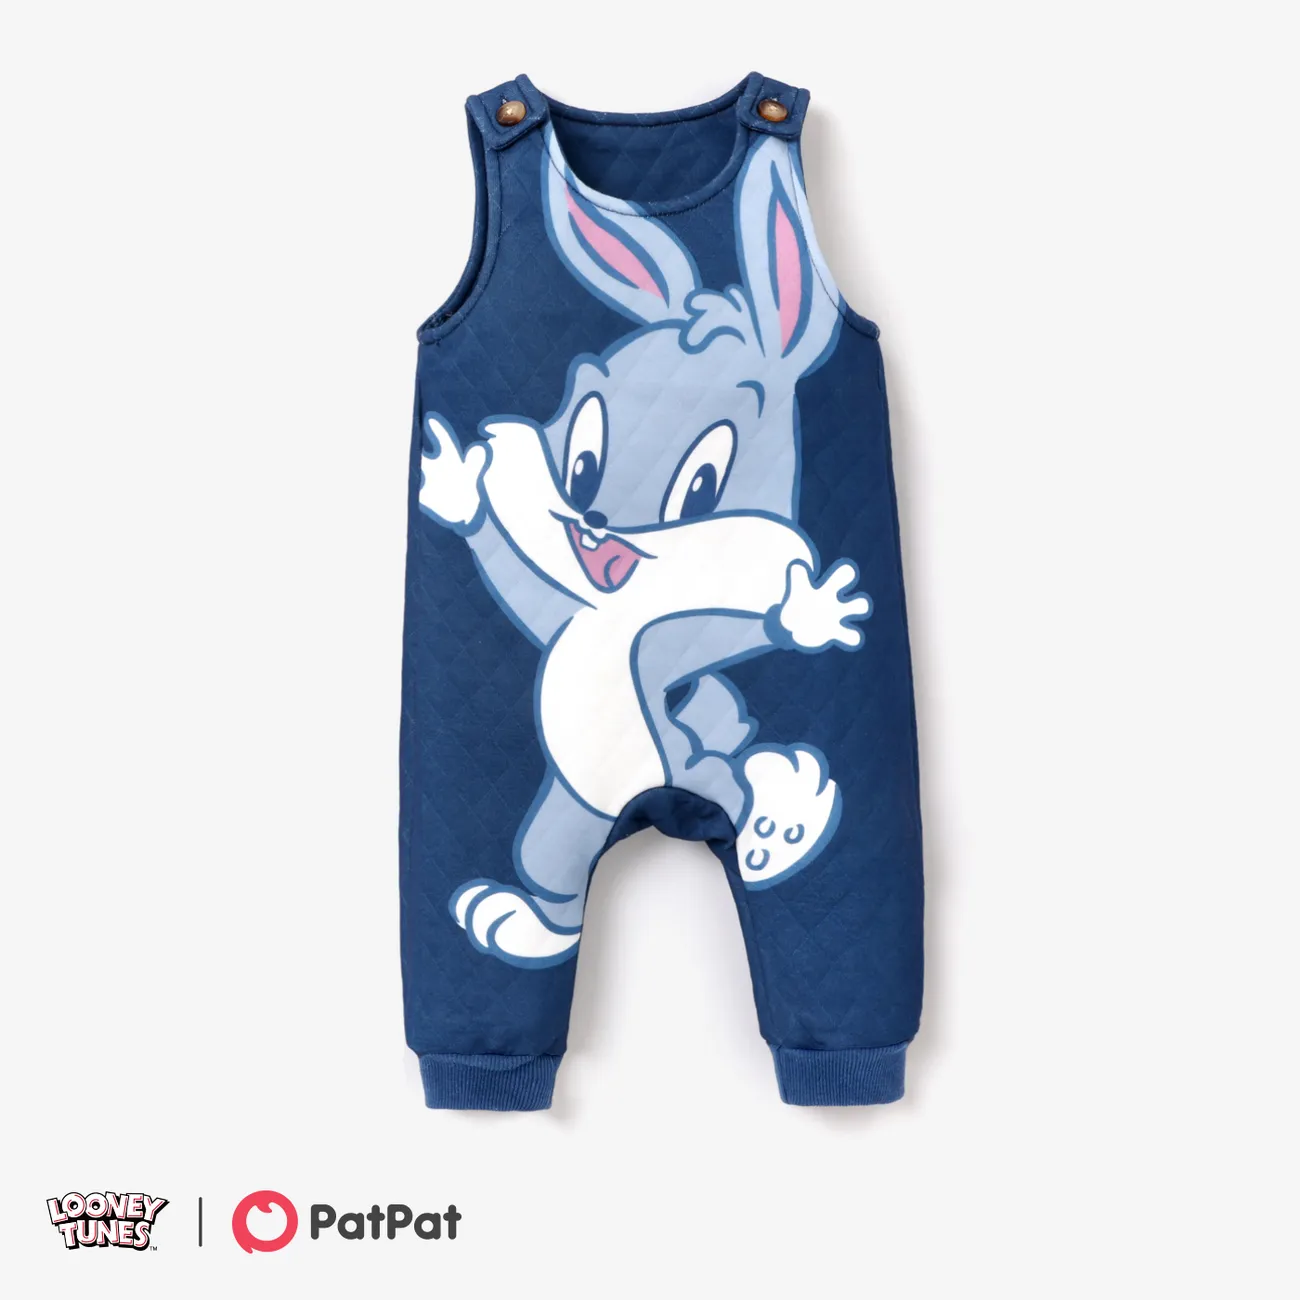 Looney Tunes Baby Boy/Girl Character Graphic Print Top or Jumpsuit  big image 1